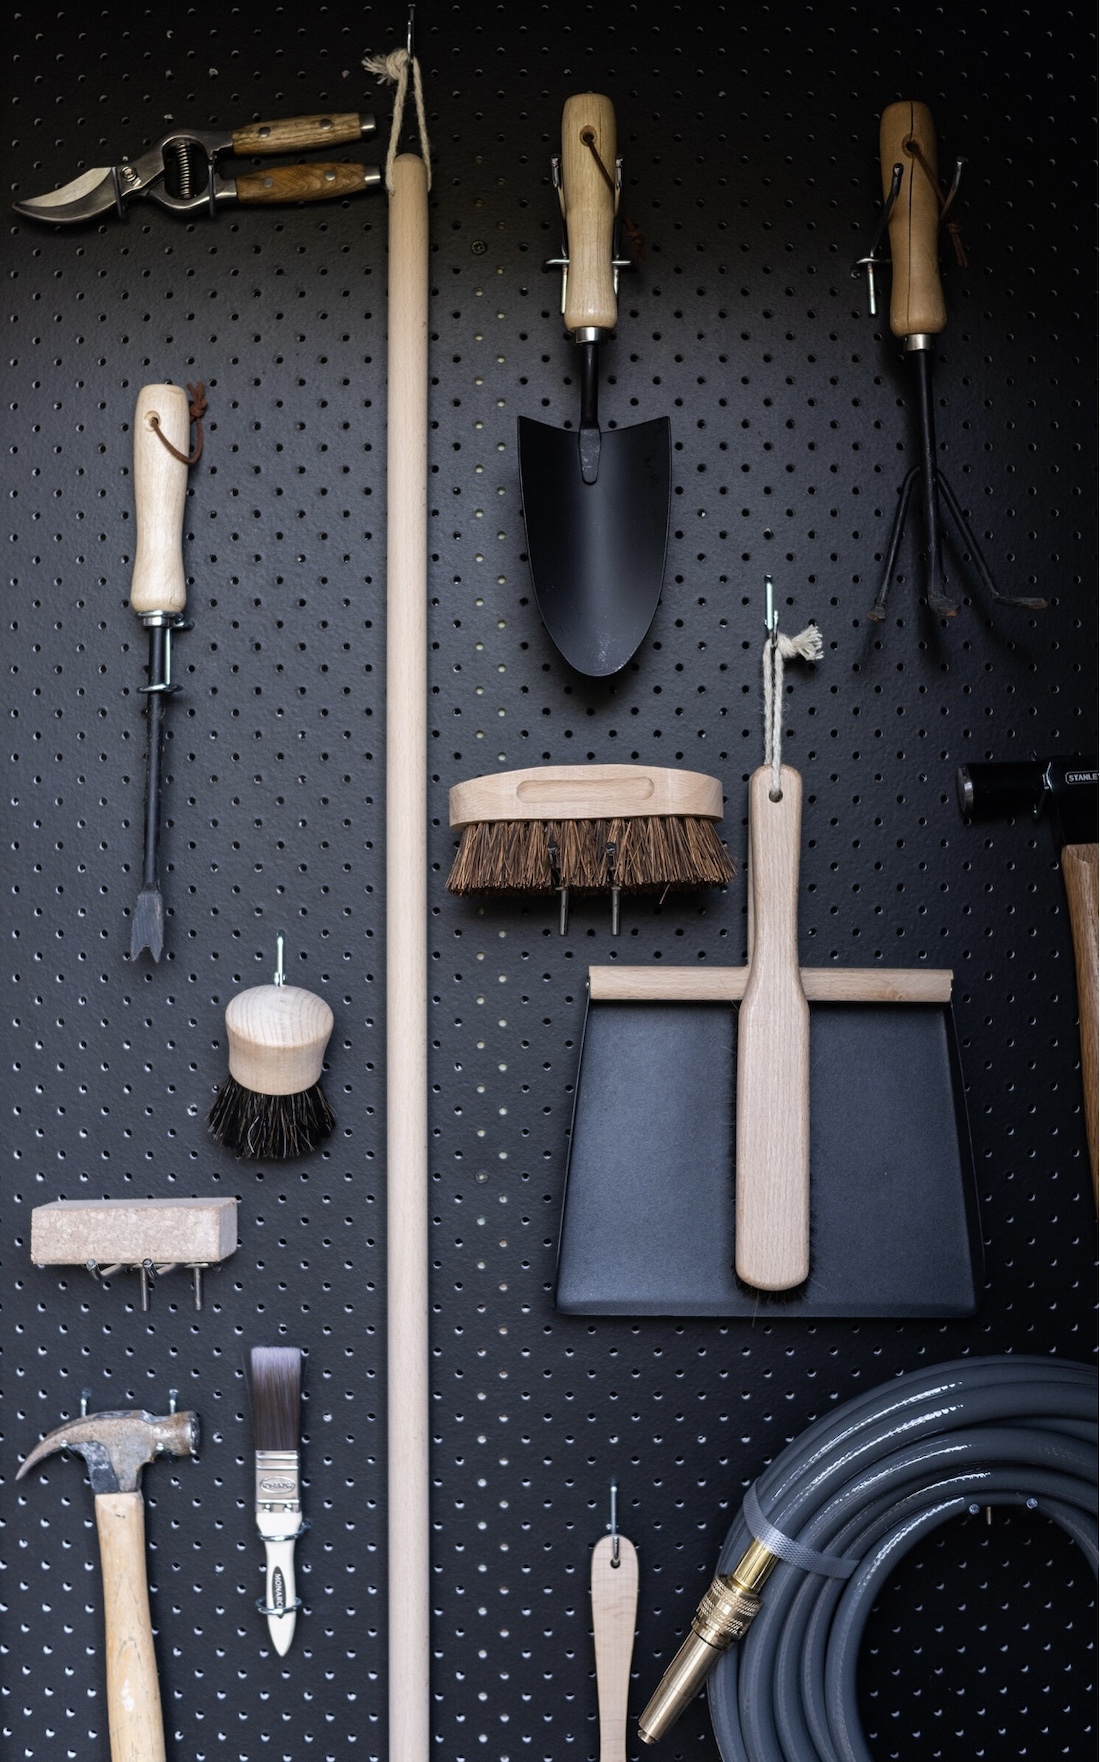 Pegboard to organise tools